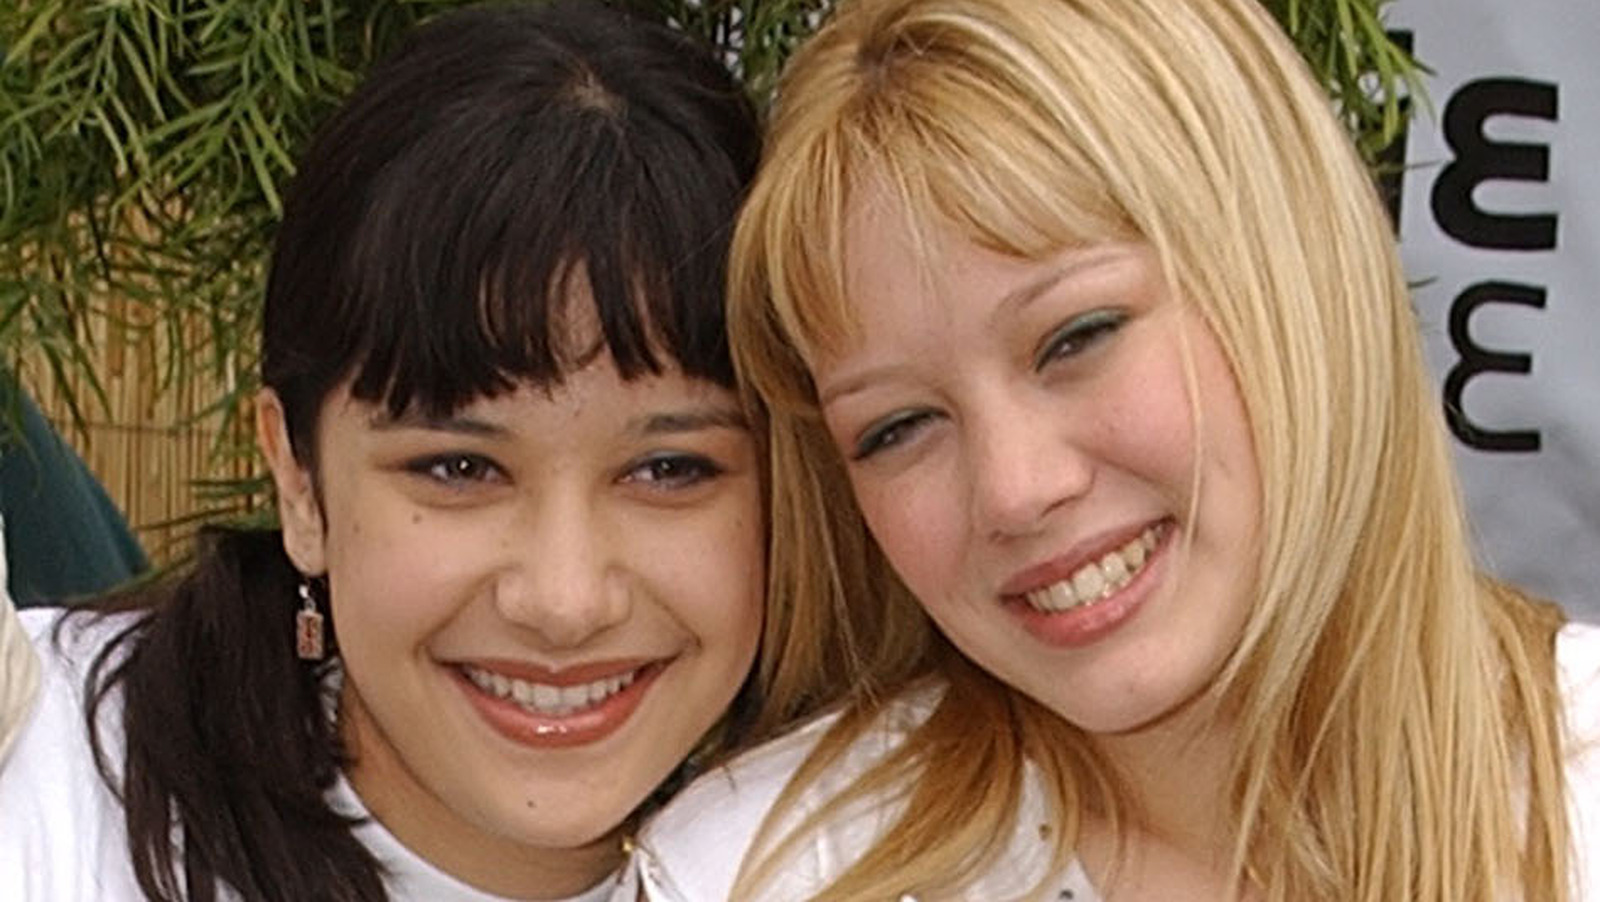 Whatever Happened To The Cast Of Lizzie Mcguire